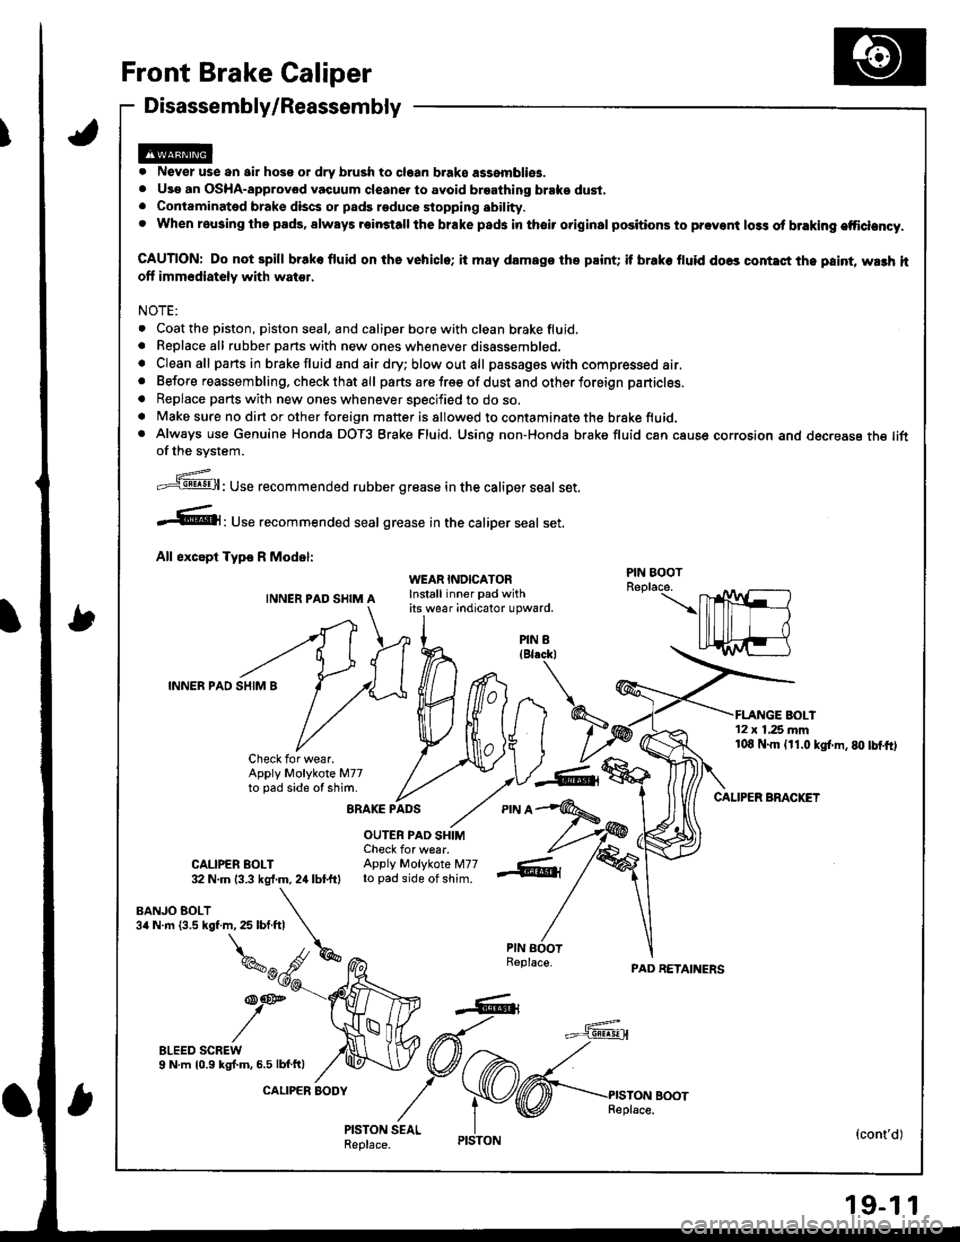 HONDA INTEGRA 1998 4.G User Guide Front Brake Caliper
Disassembly/Reassembly
. Never use an air hoss or dry brush to claan b.ake assemblies.. Use an OsHA-approvod vacuum cleane. to avoid breathing braks dust,. Contaminated brake discs